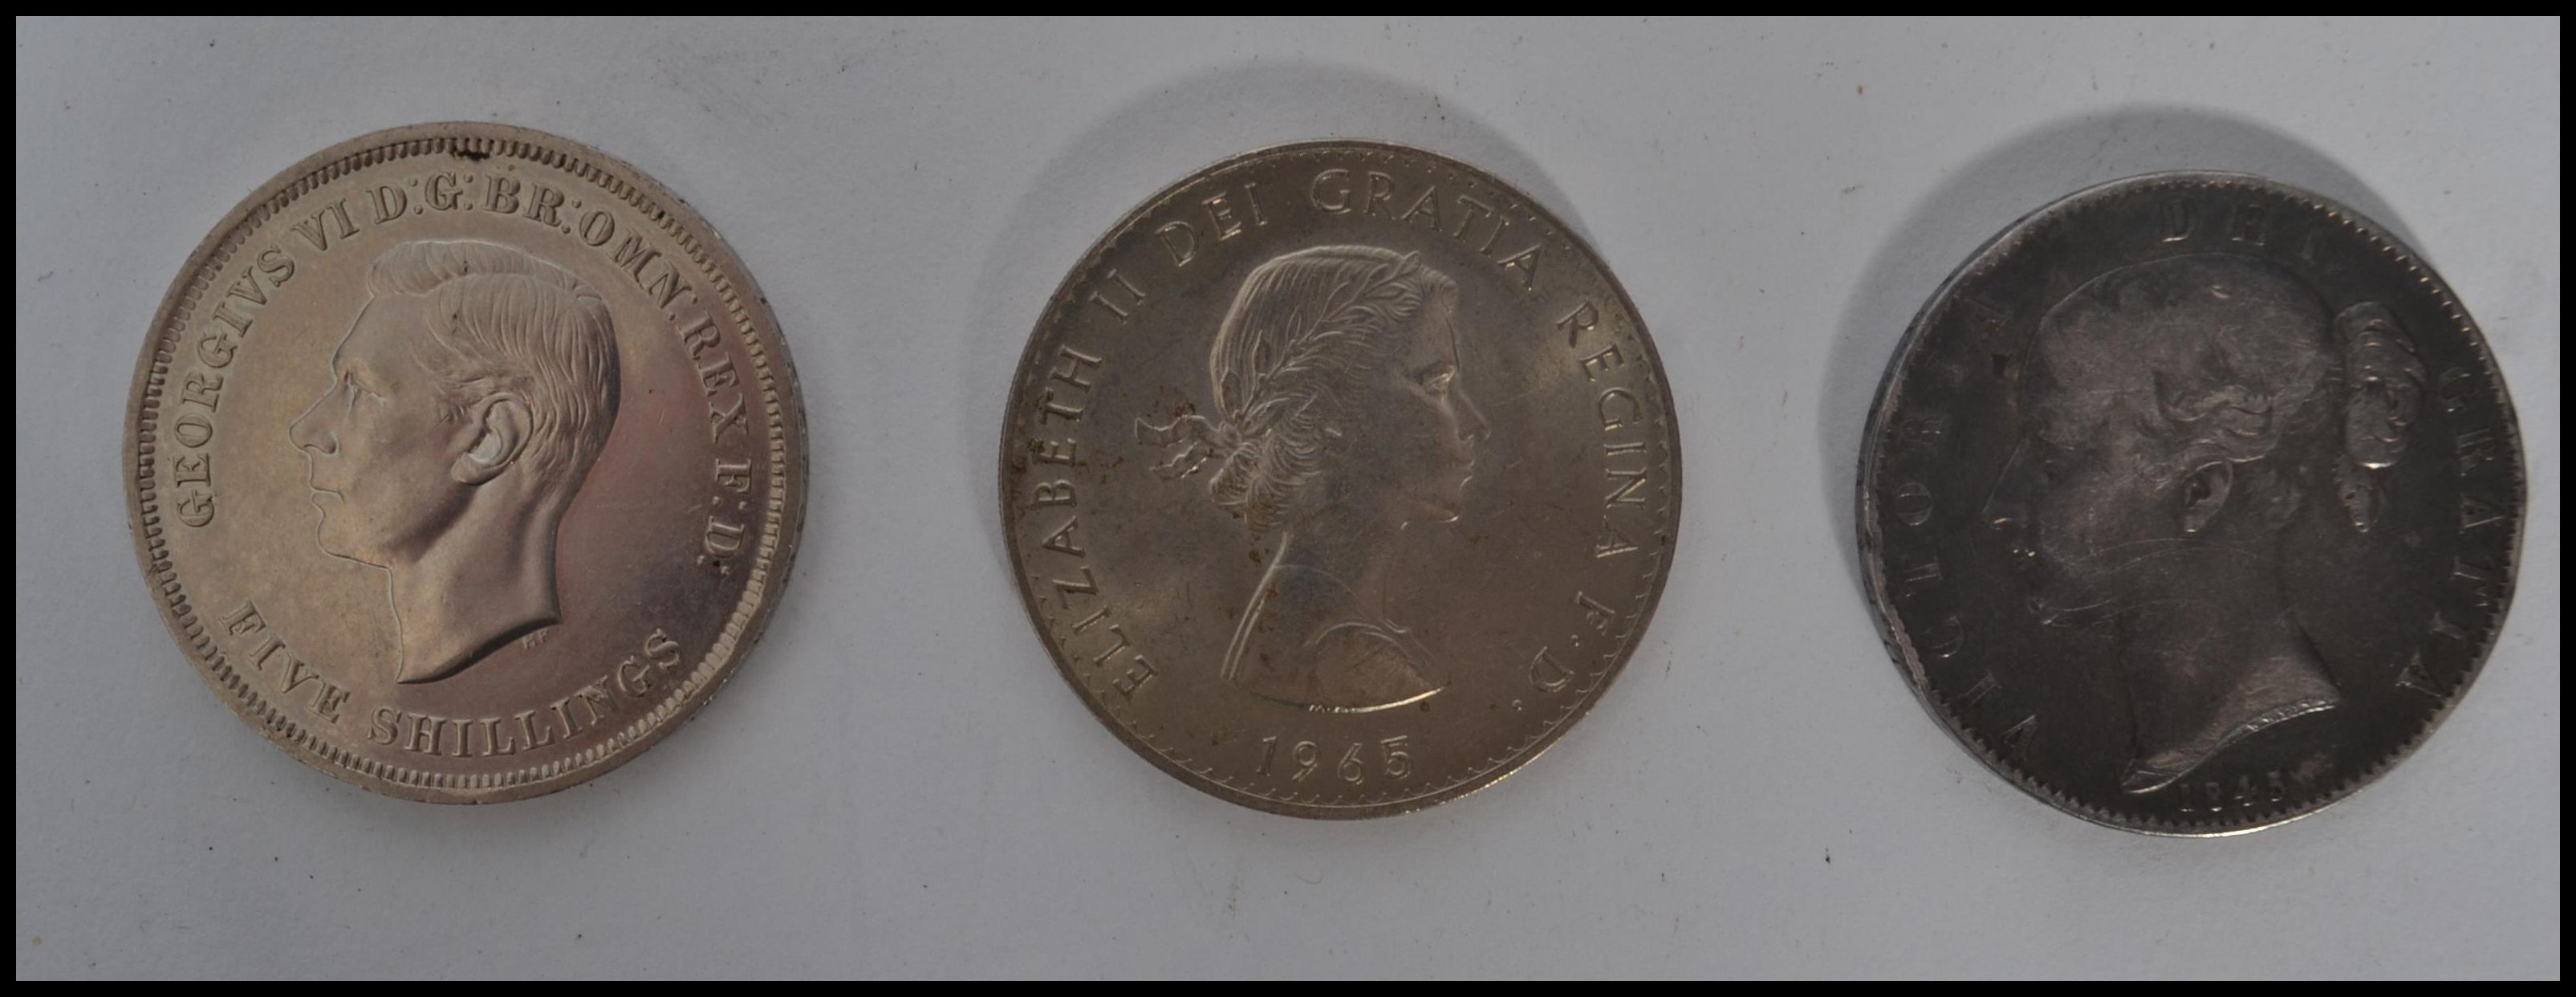 A first half of the 19th century young Victoria bust silver crown dating to 1845 together with a - Image 3 of 3